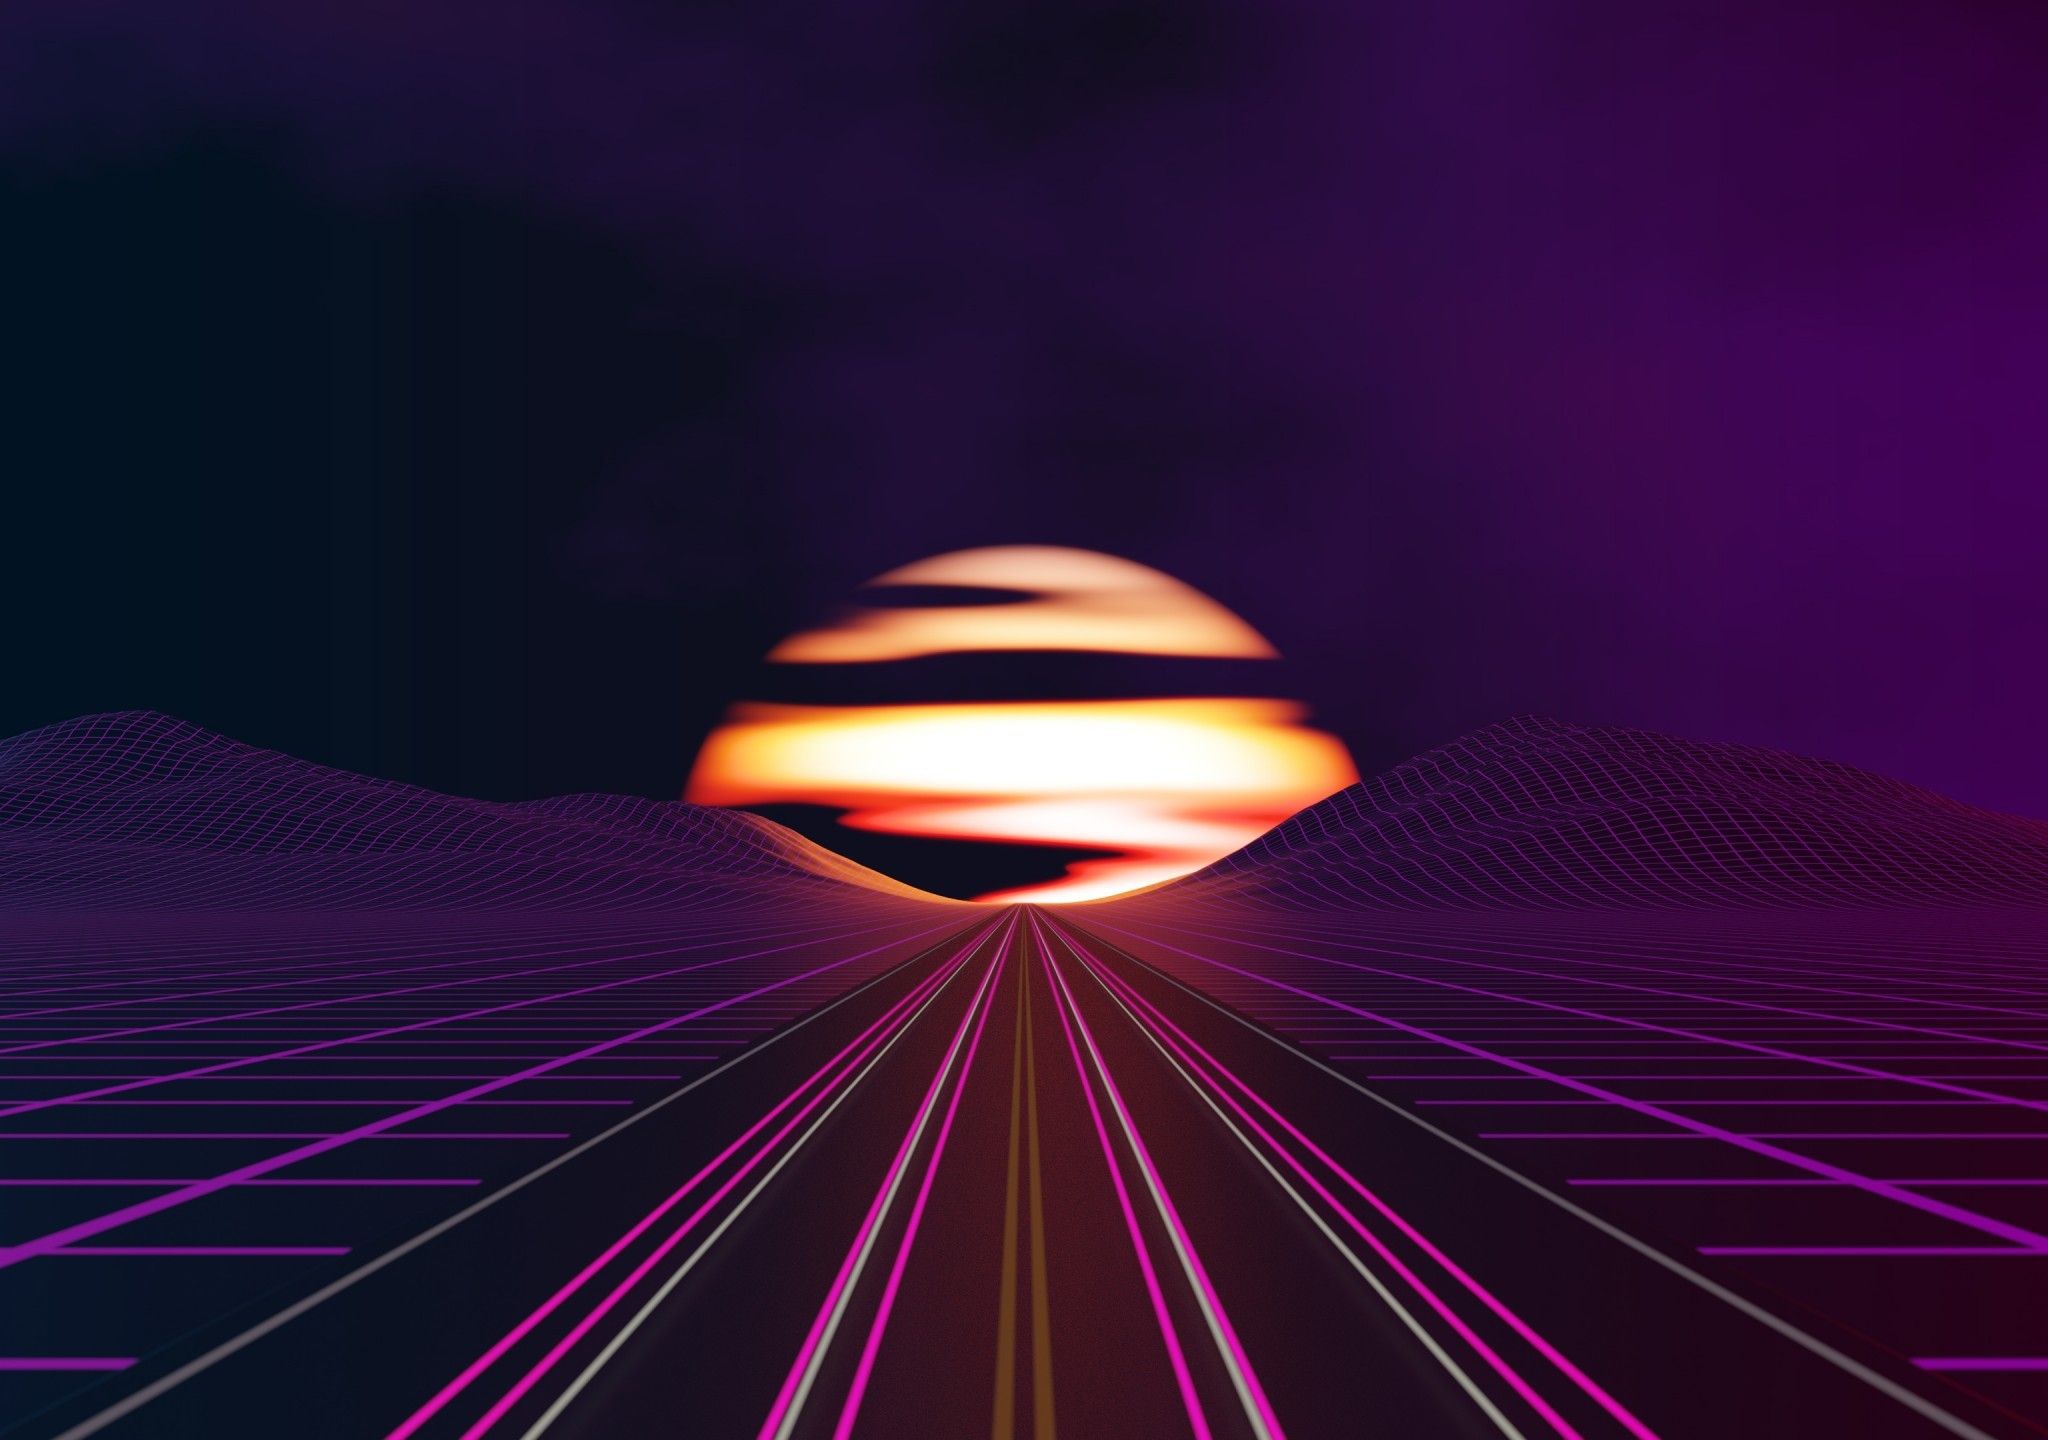 Download 2048x1440 Synthwave Road, Moon, Neon Light, Mountains Wallpaper